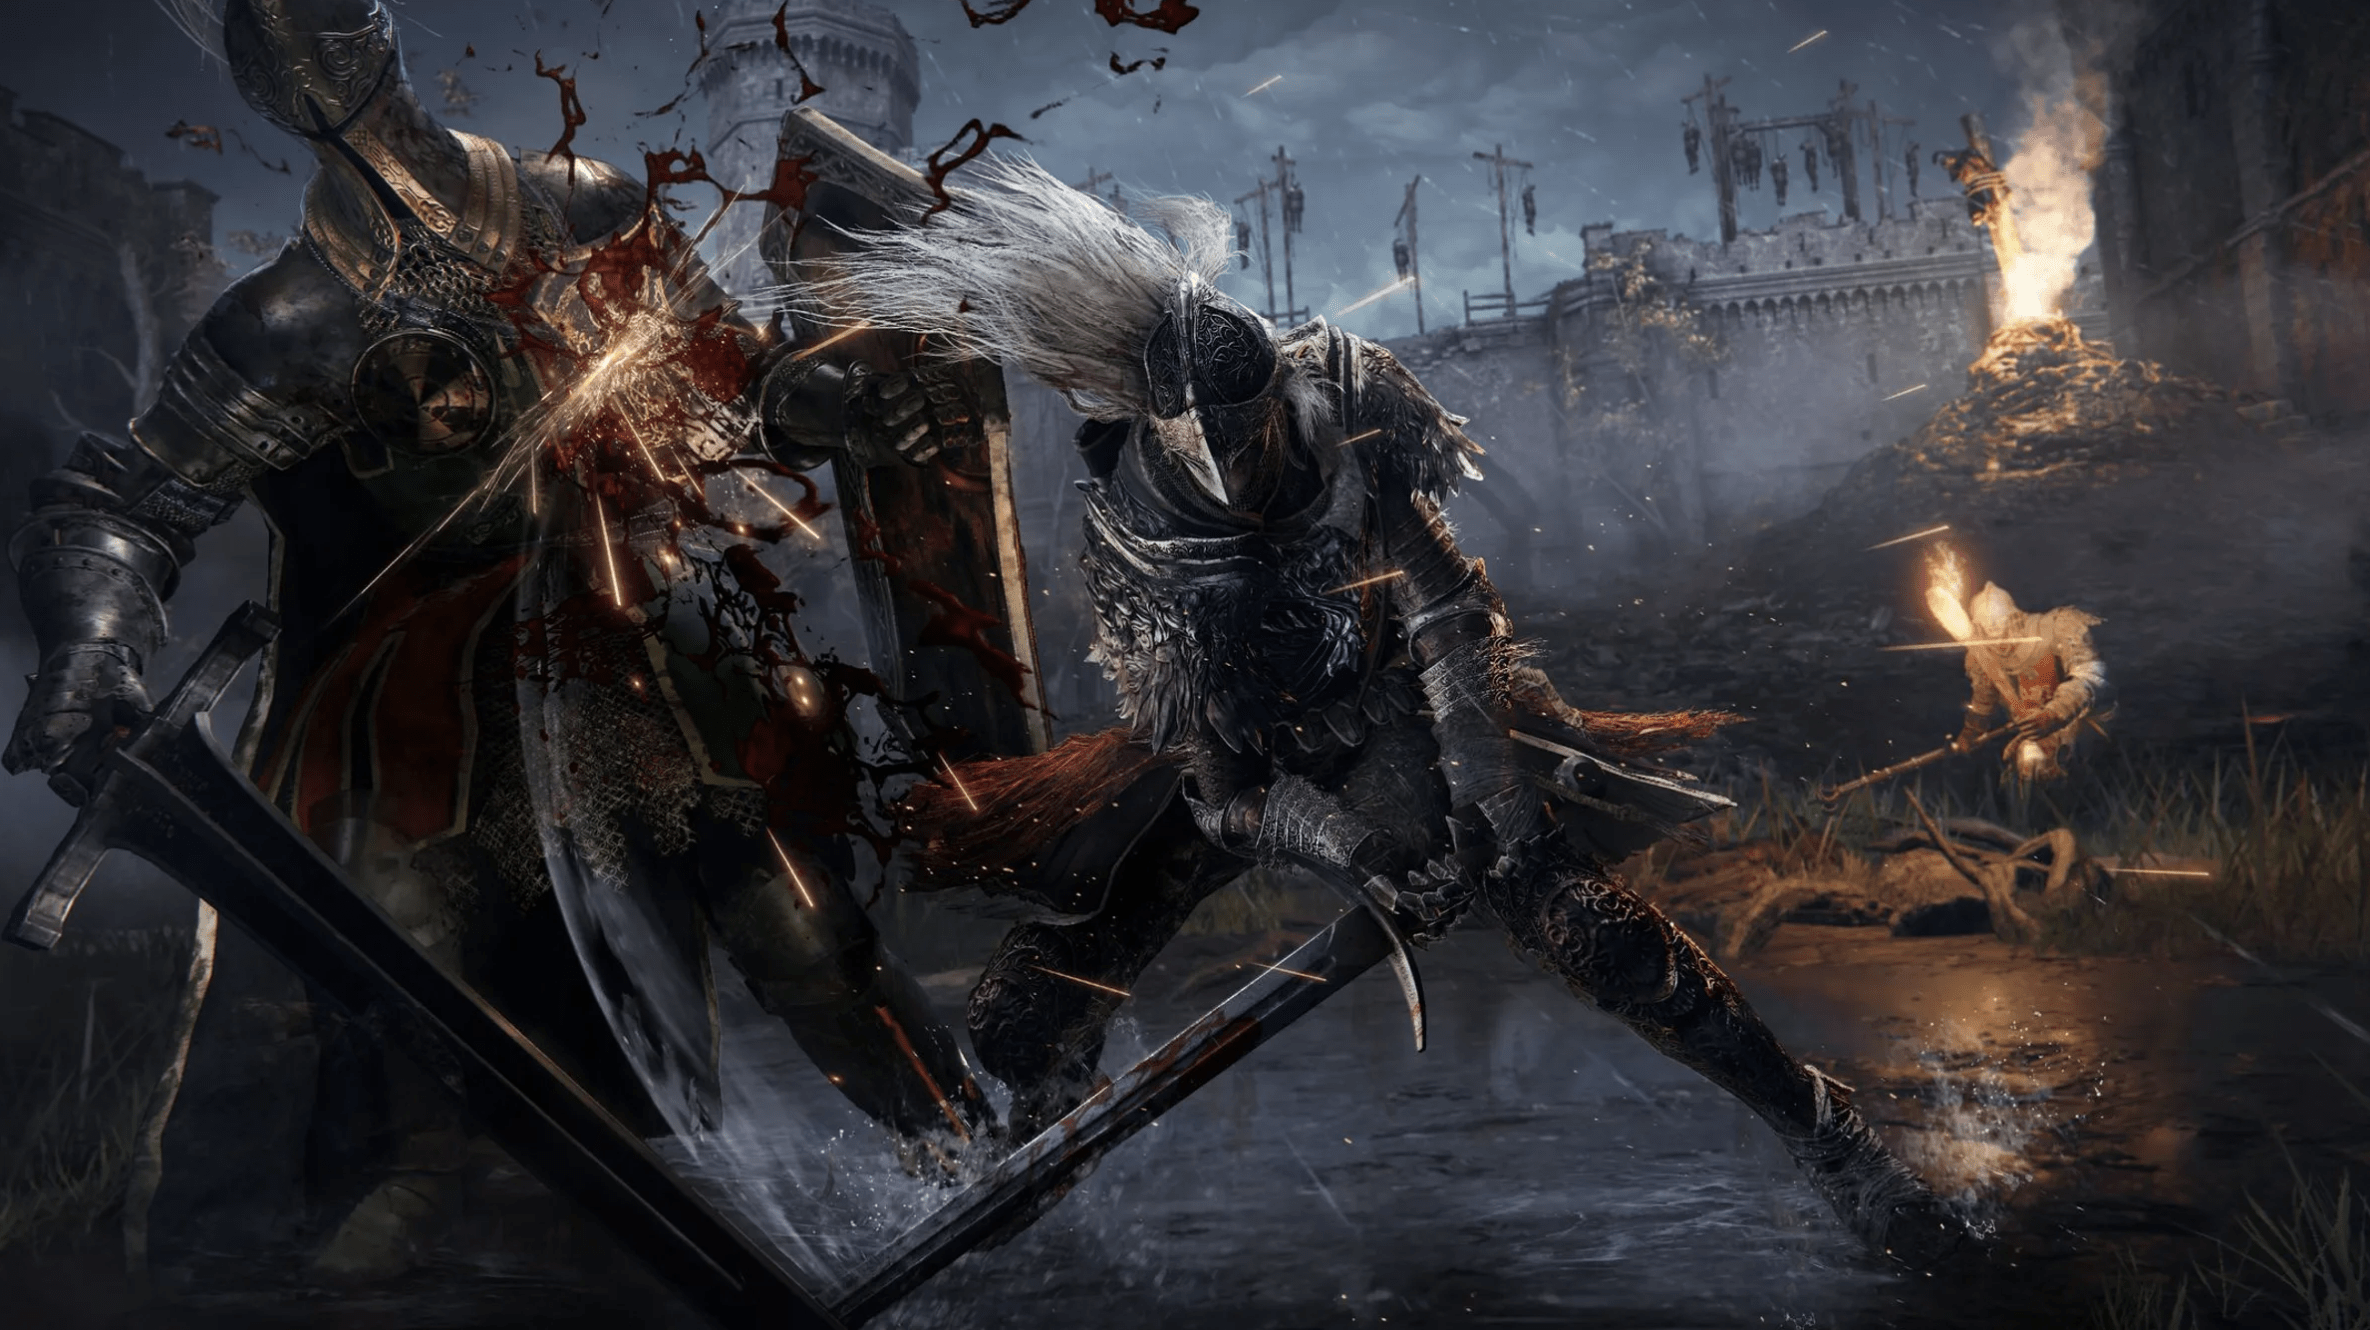 Dataminer Says Bloodborne PC Version Exists, Produces Receipts